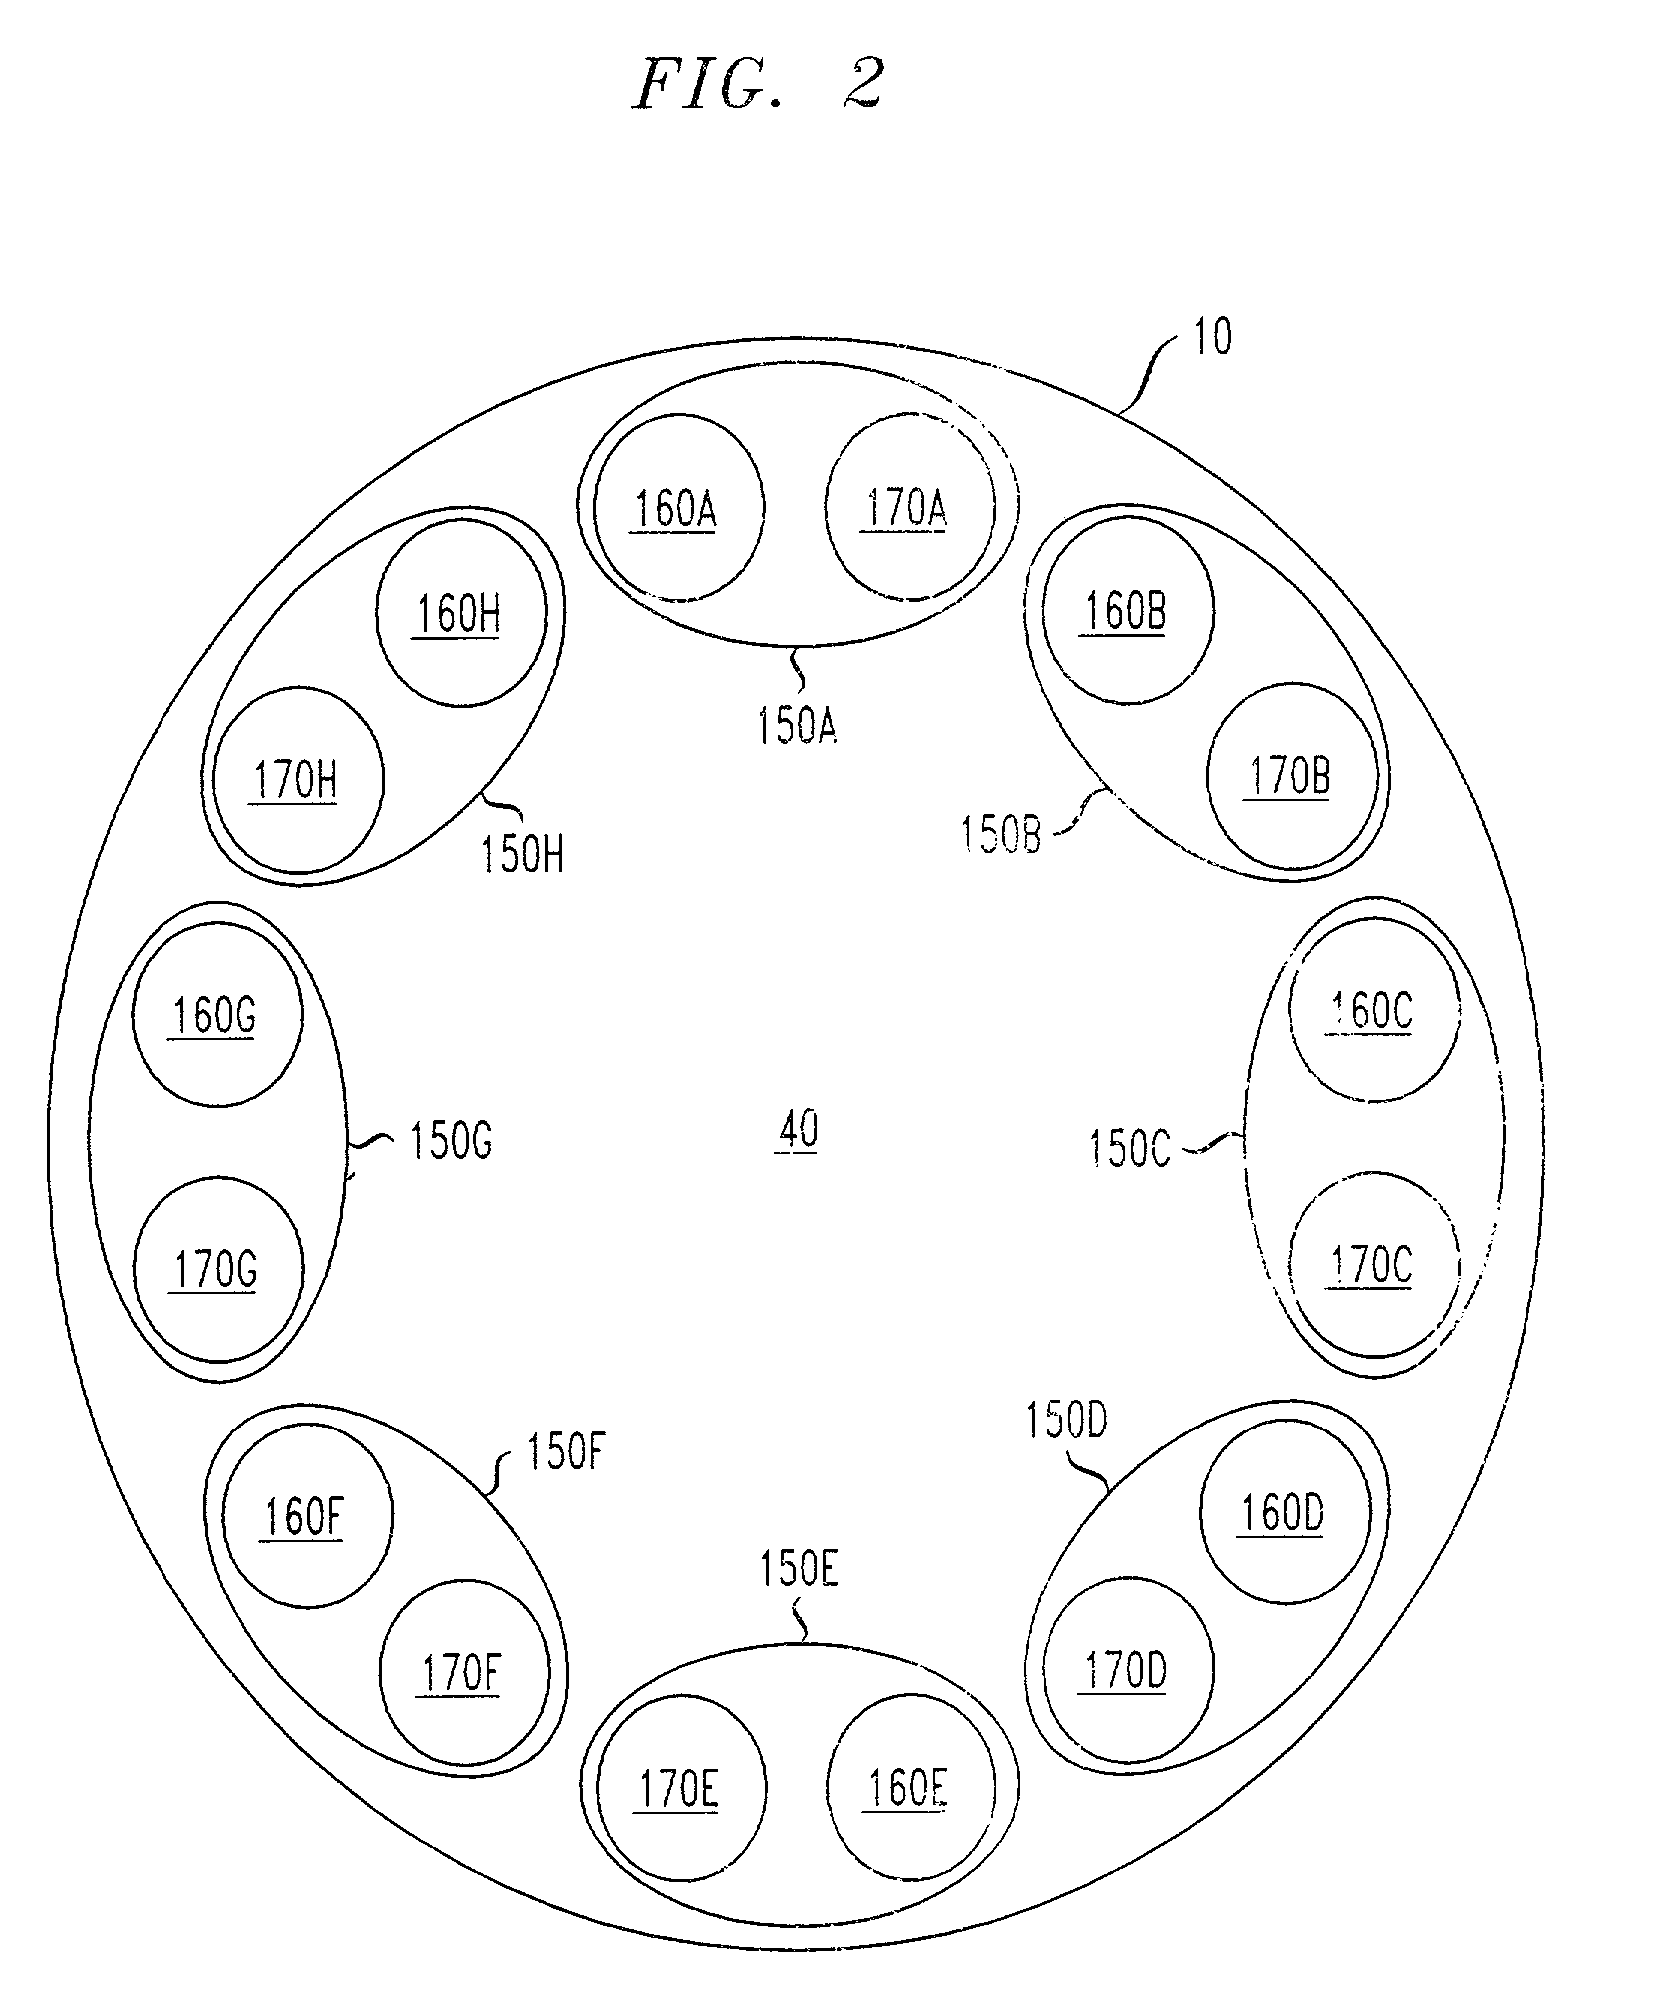 Interconnecting processing units of a stored program controlled system using space division multiplexed free space optics